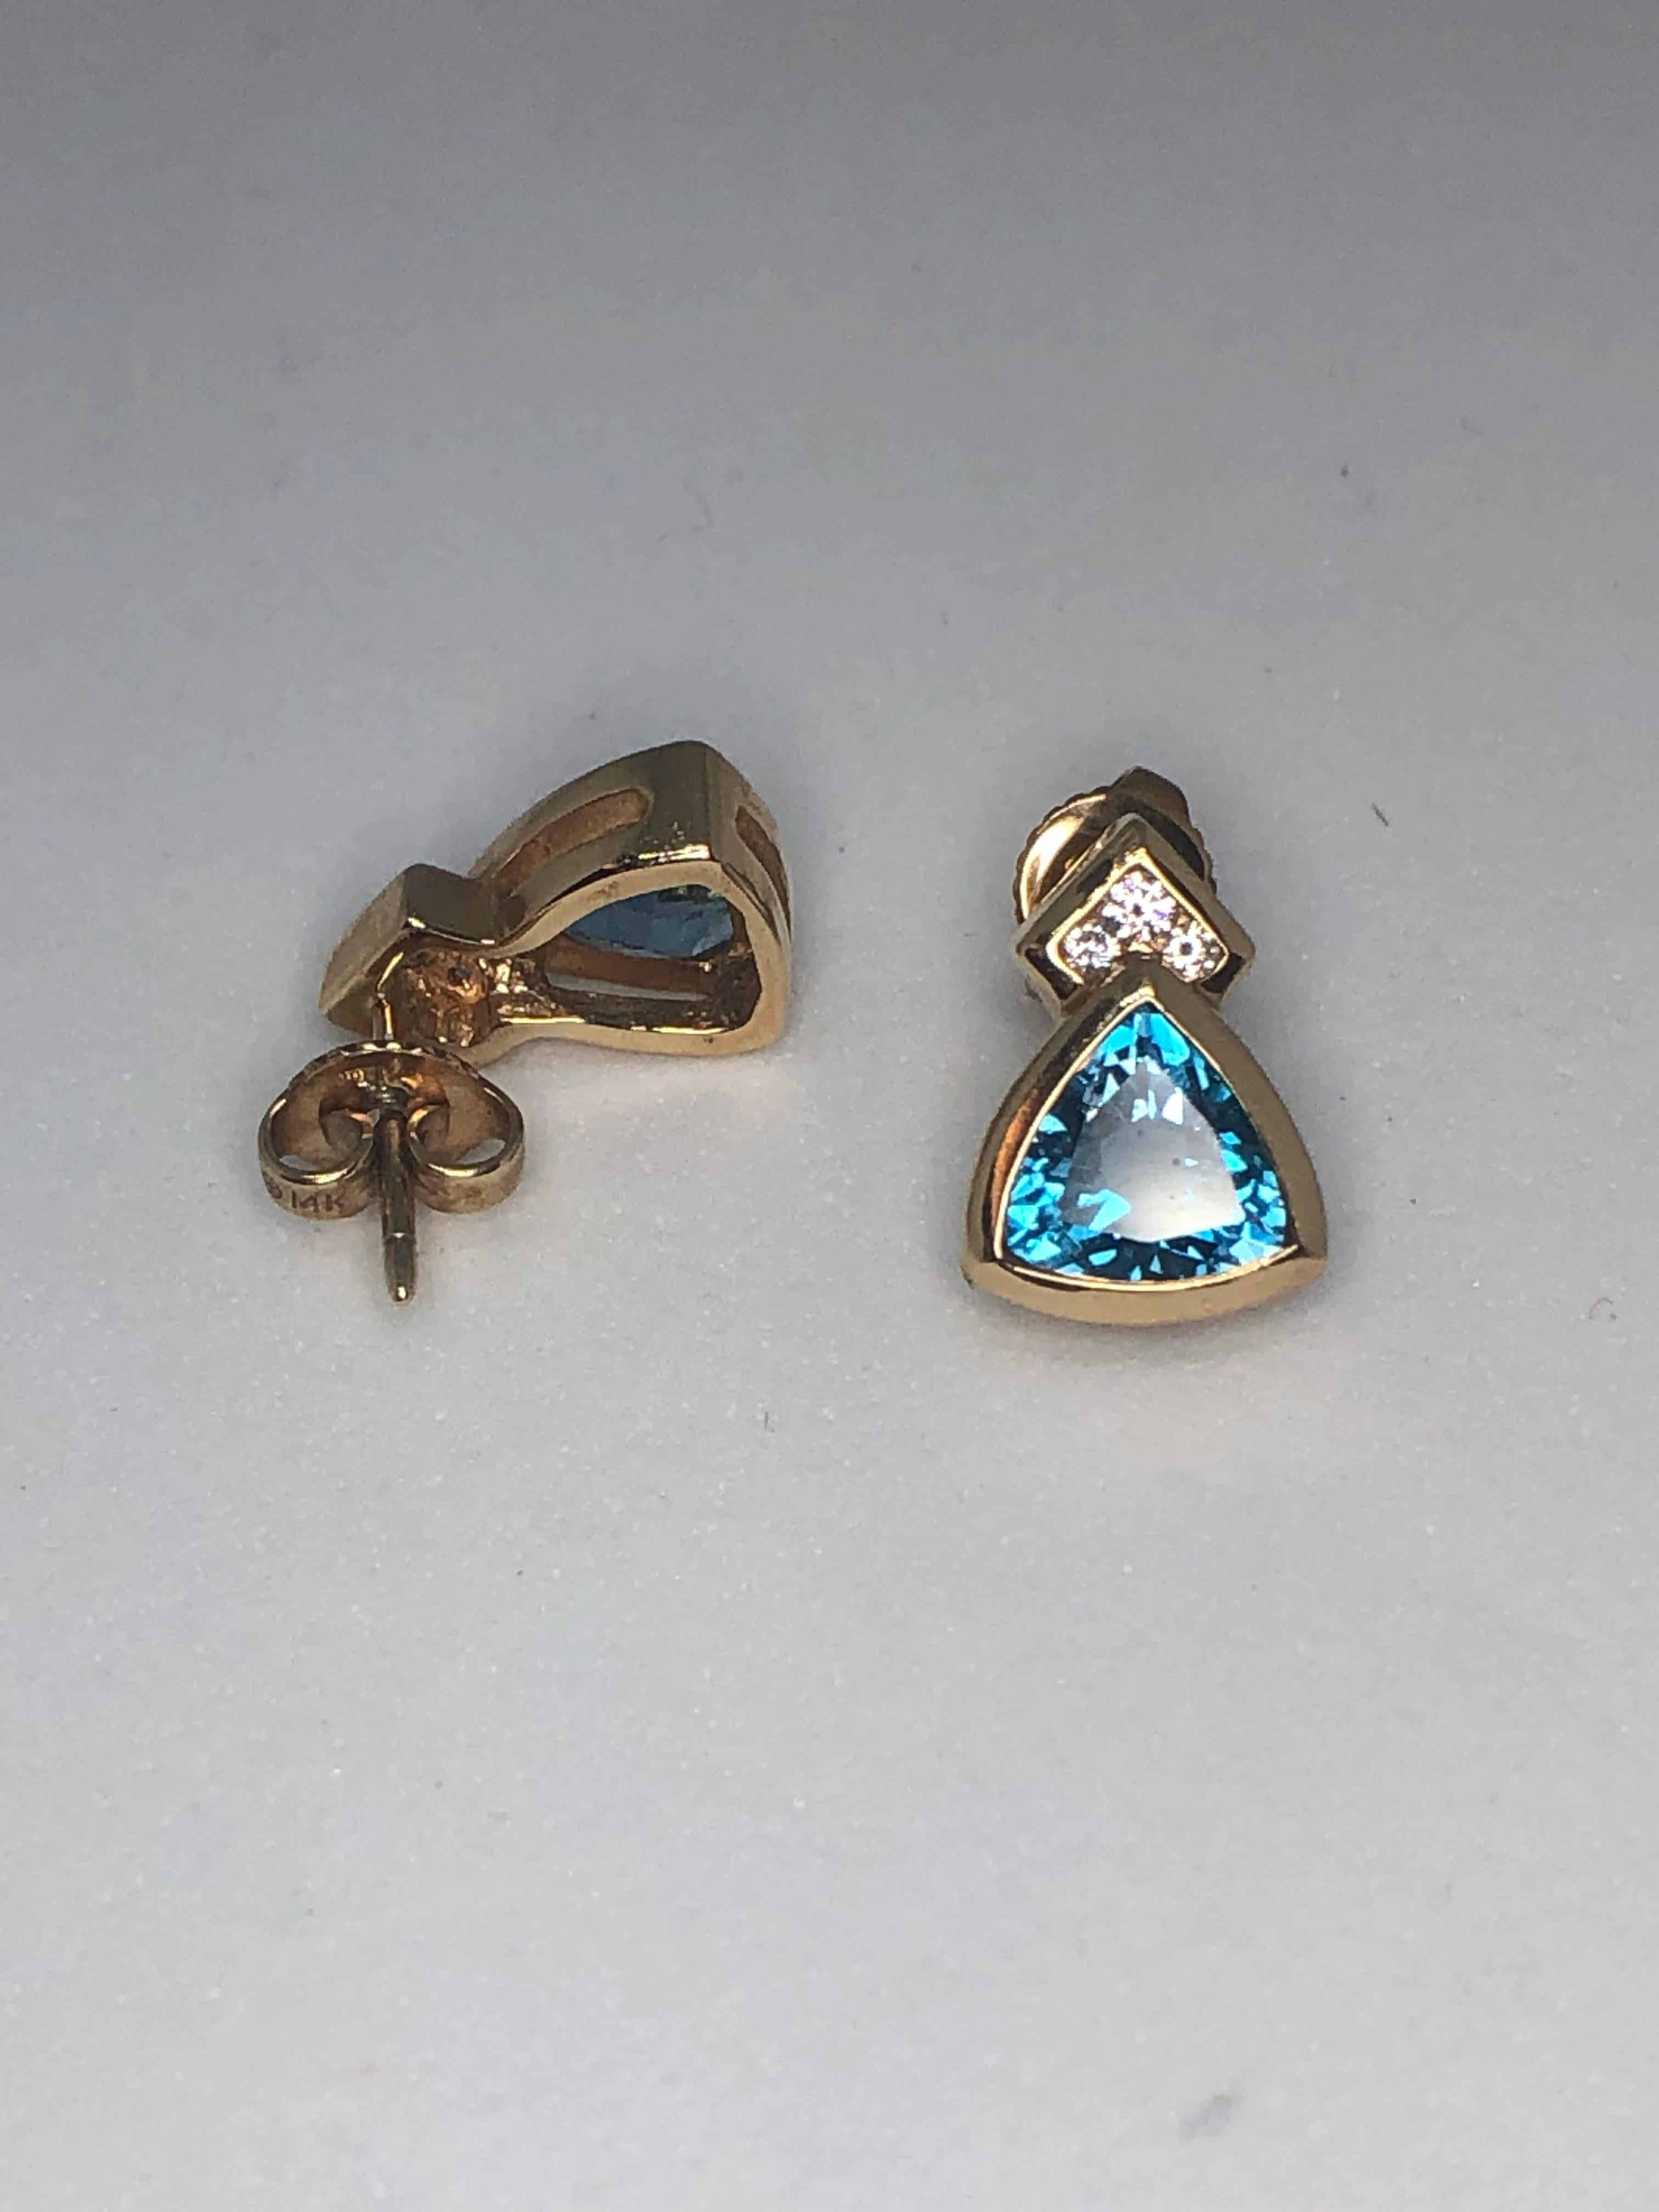 Lady's blue topaz and diamond earrings by Church & Company in 14kt yellow gold. These earrings boast of 2 - blue topaz gems = 1.99ct total weight, accented by 6 - full cut round diamonds = .11ct total weight.